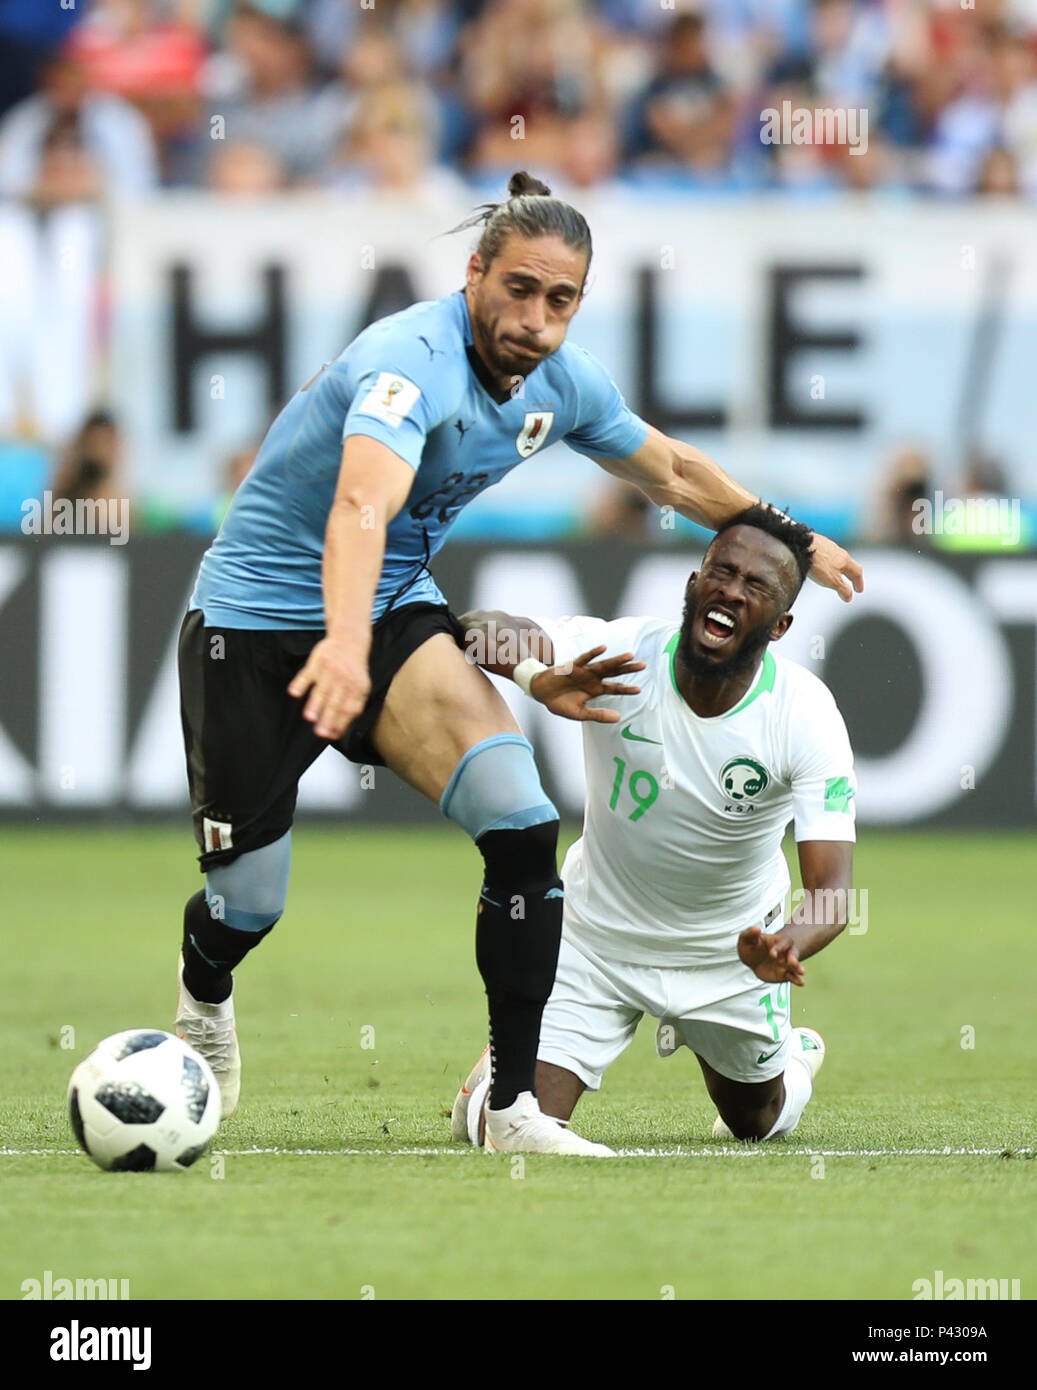 Rostov On Don. 20th June, 2018. Martin Caceres (L) of Uruguay vies with Fahad Almuwallad of Saudi Arabia during a Group A match between Uruguay and Saudi Arabia at the 2018 FIFA World Cup in Rostov-on-Don, Russia, June 20, 2018. Credit: Lu Jinbo/Xinhua/Alamy Live News Stock Photo